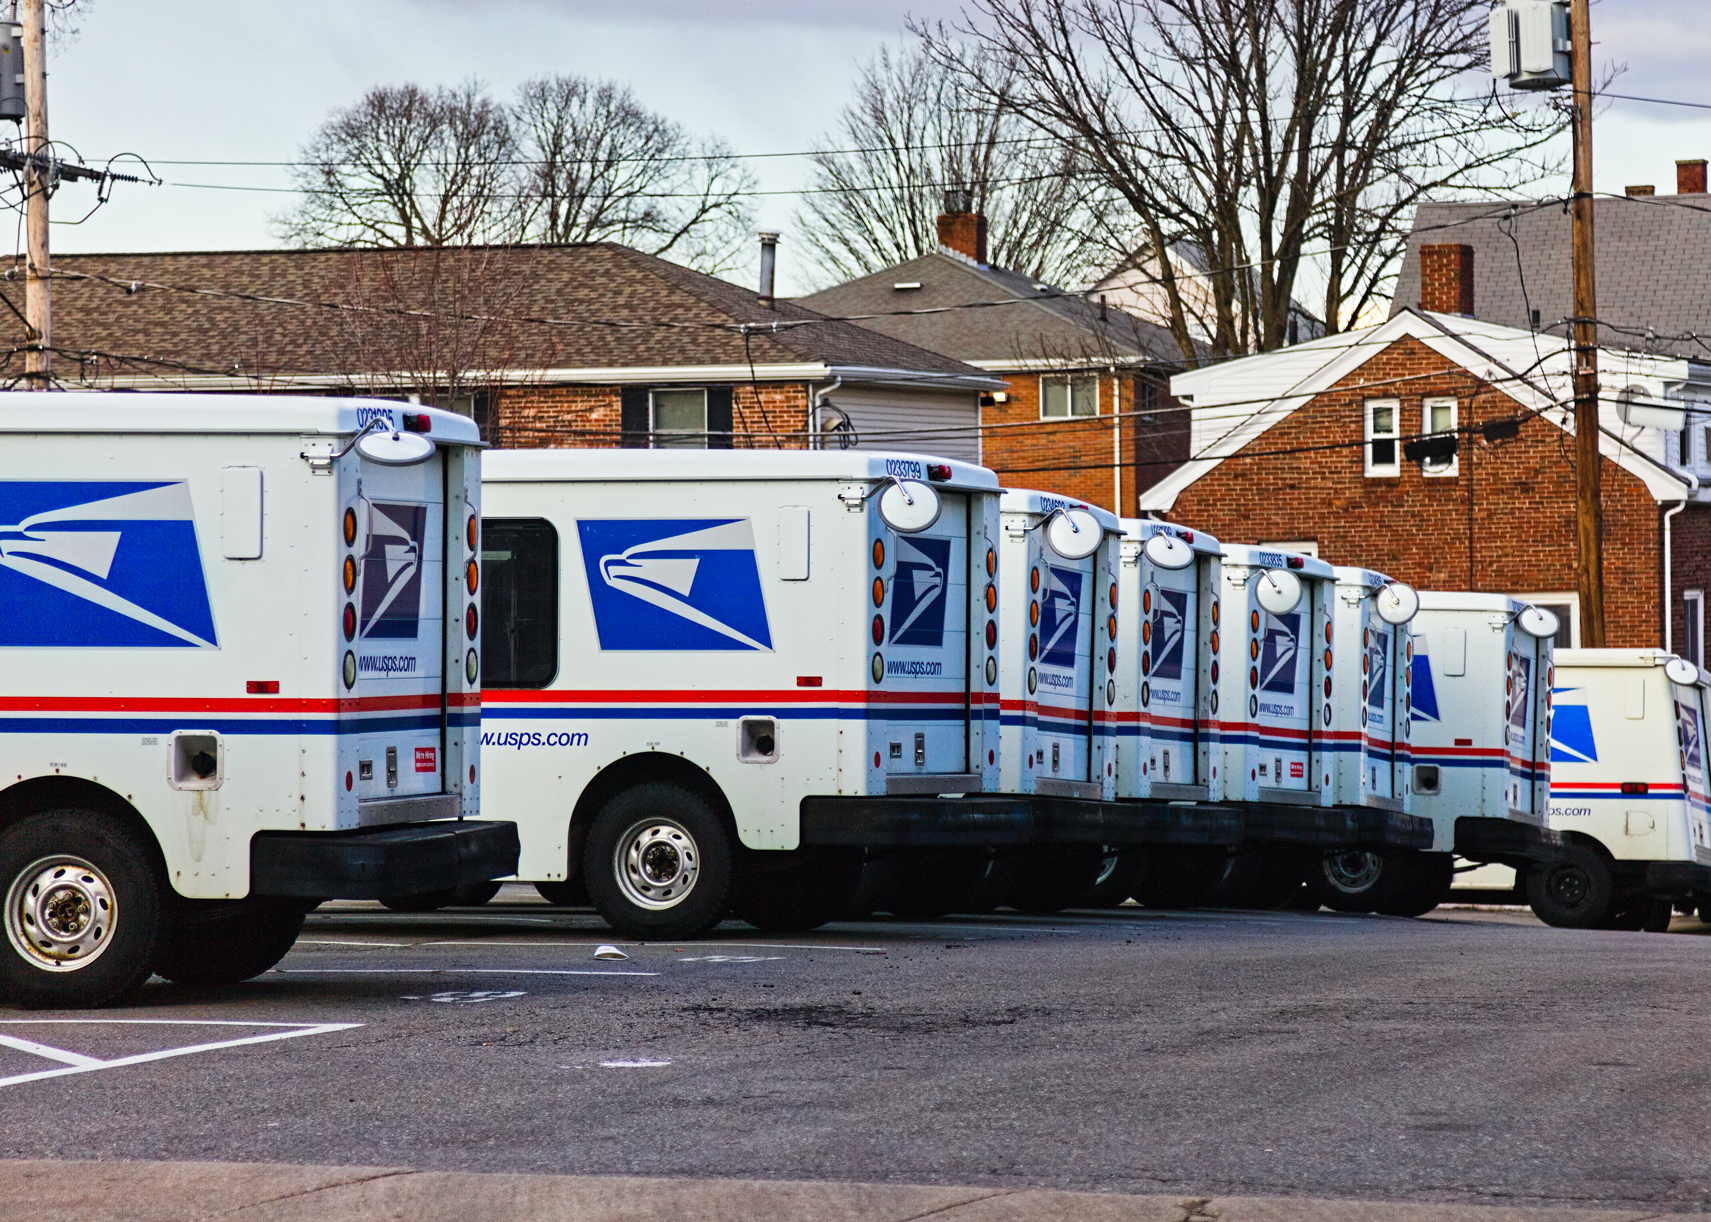 The latest from the USPS Regarding Postage Rates